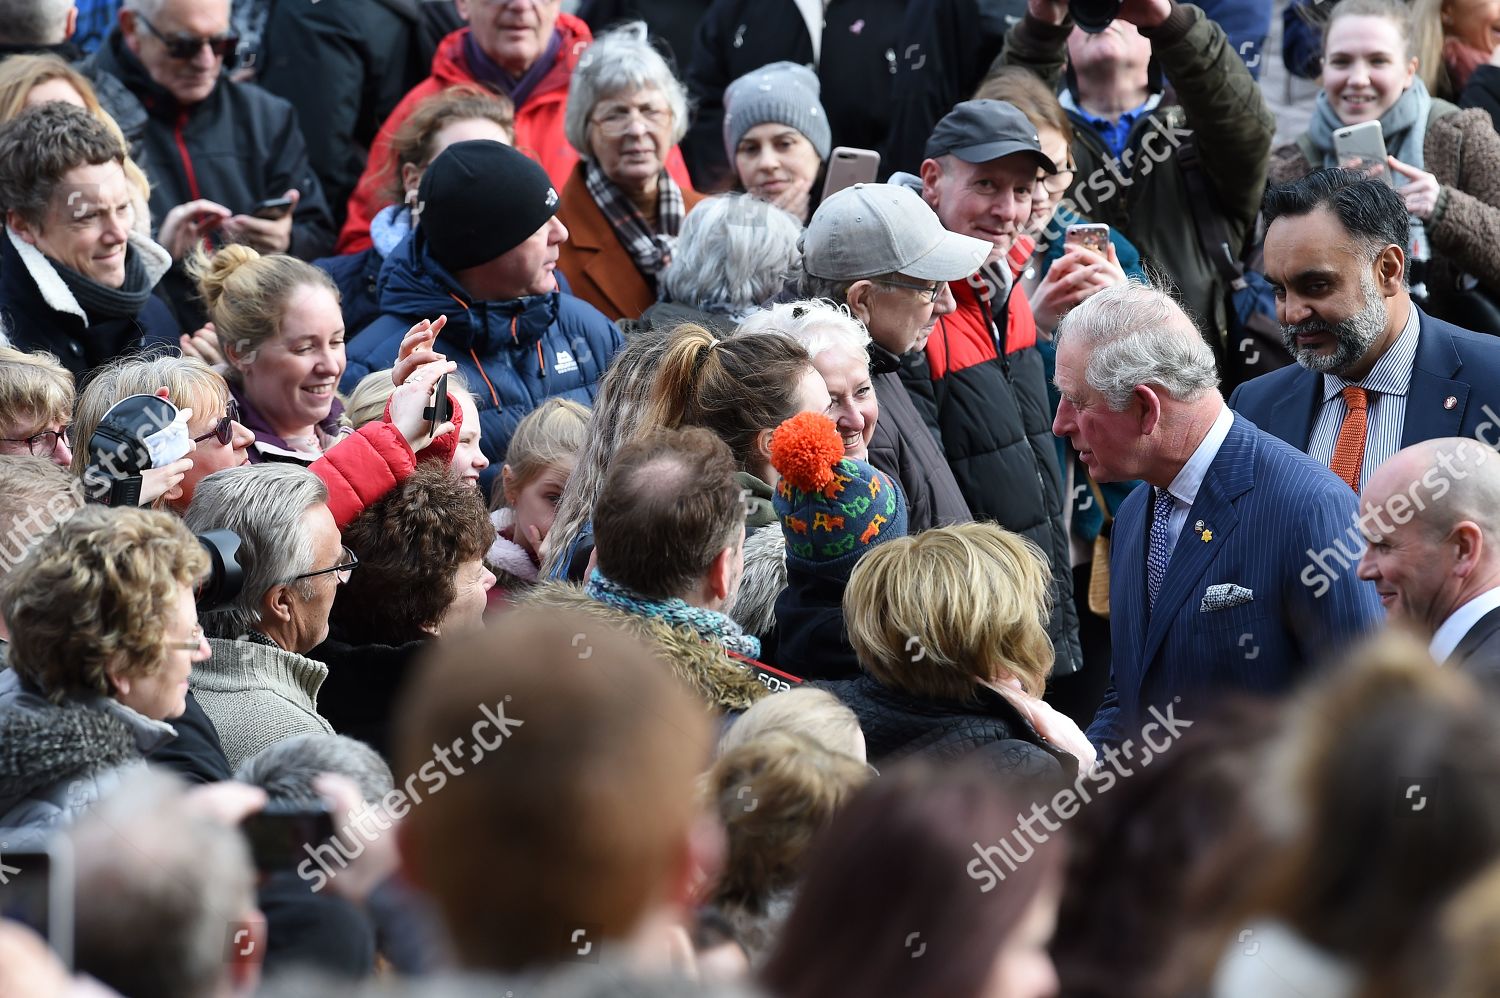 CASA REAL BRITÁNICA - Página 10 Prince-charles-and-camilla-duchess-of-cornwall-visit-to-liverpool-uk-shutterstock-editorial-10102726e